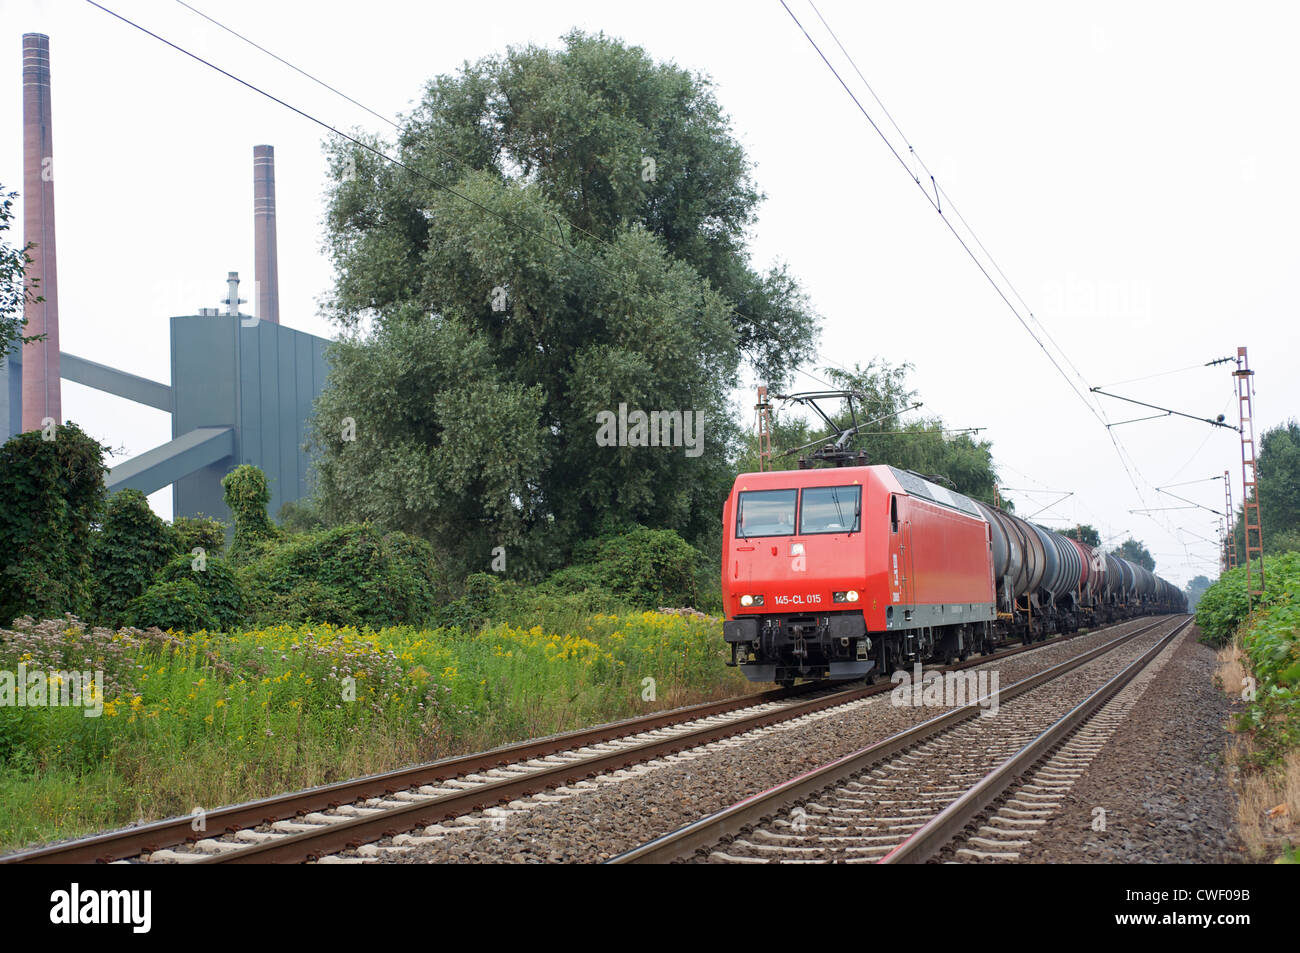 HGK railway train transporting fuel tankers, Germany. Stock Photo